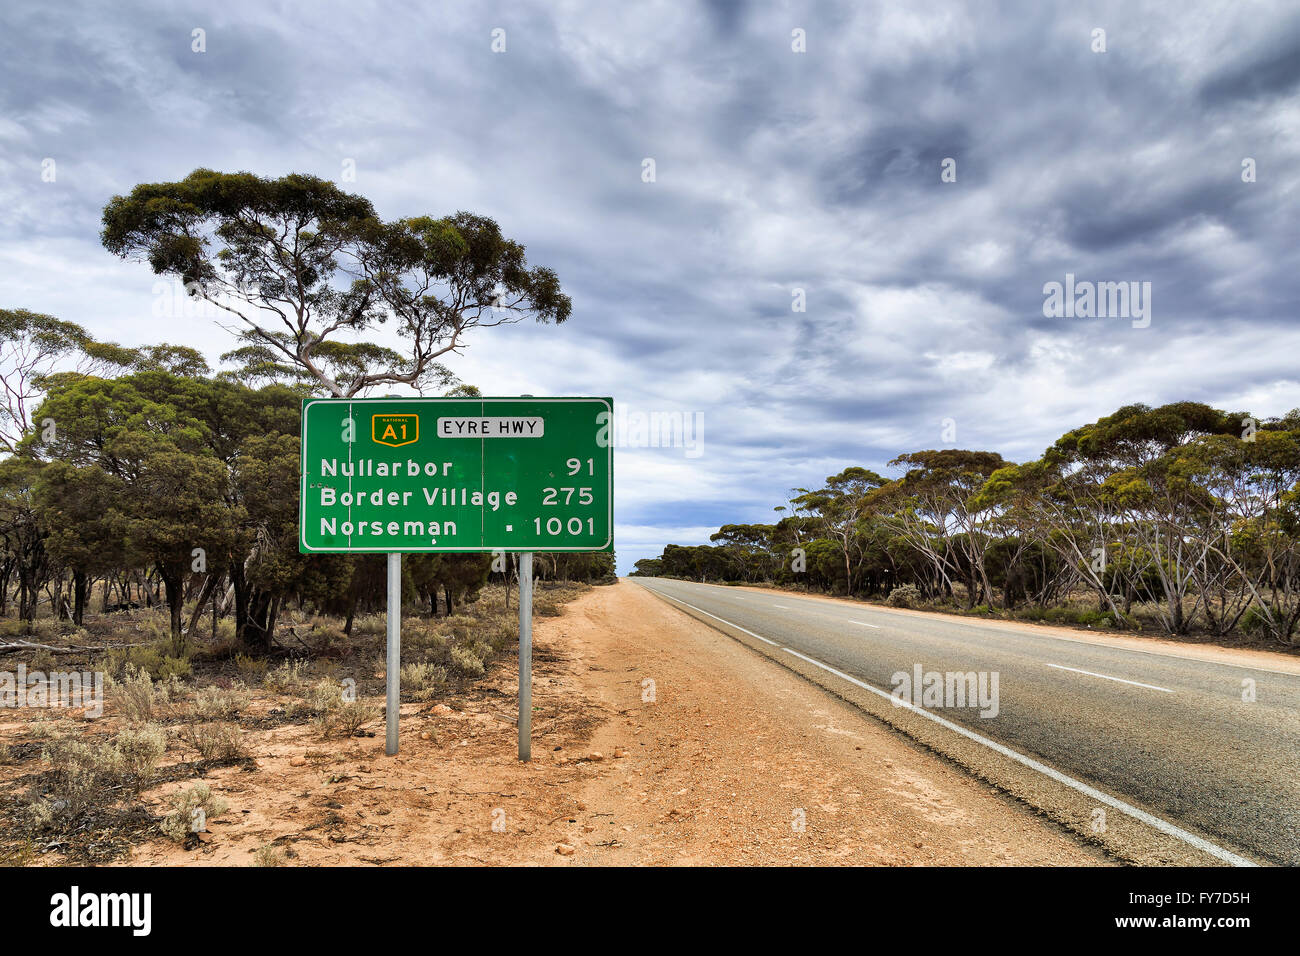 Green information road sign along National Eyre Highway A1 in South Australia somewhere in Nullarbor plain with only a trees Stock Photo